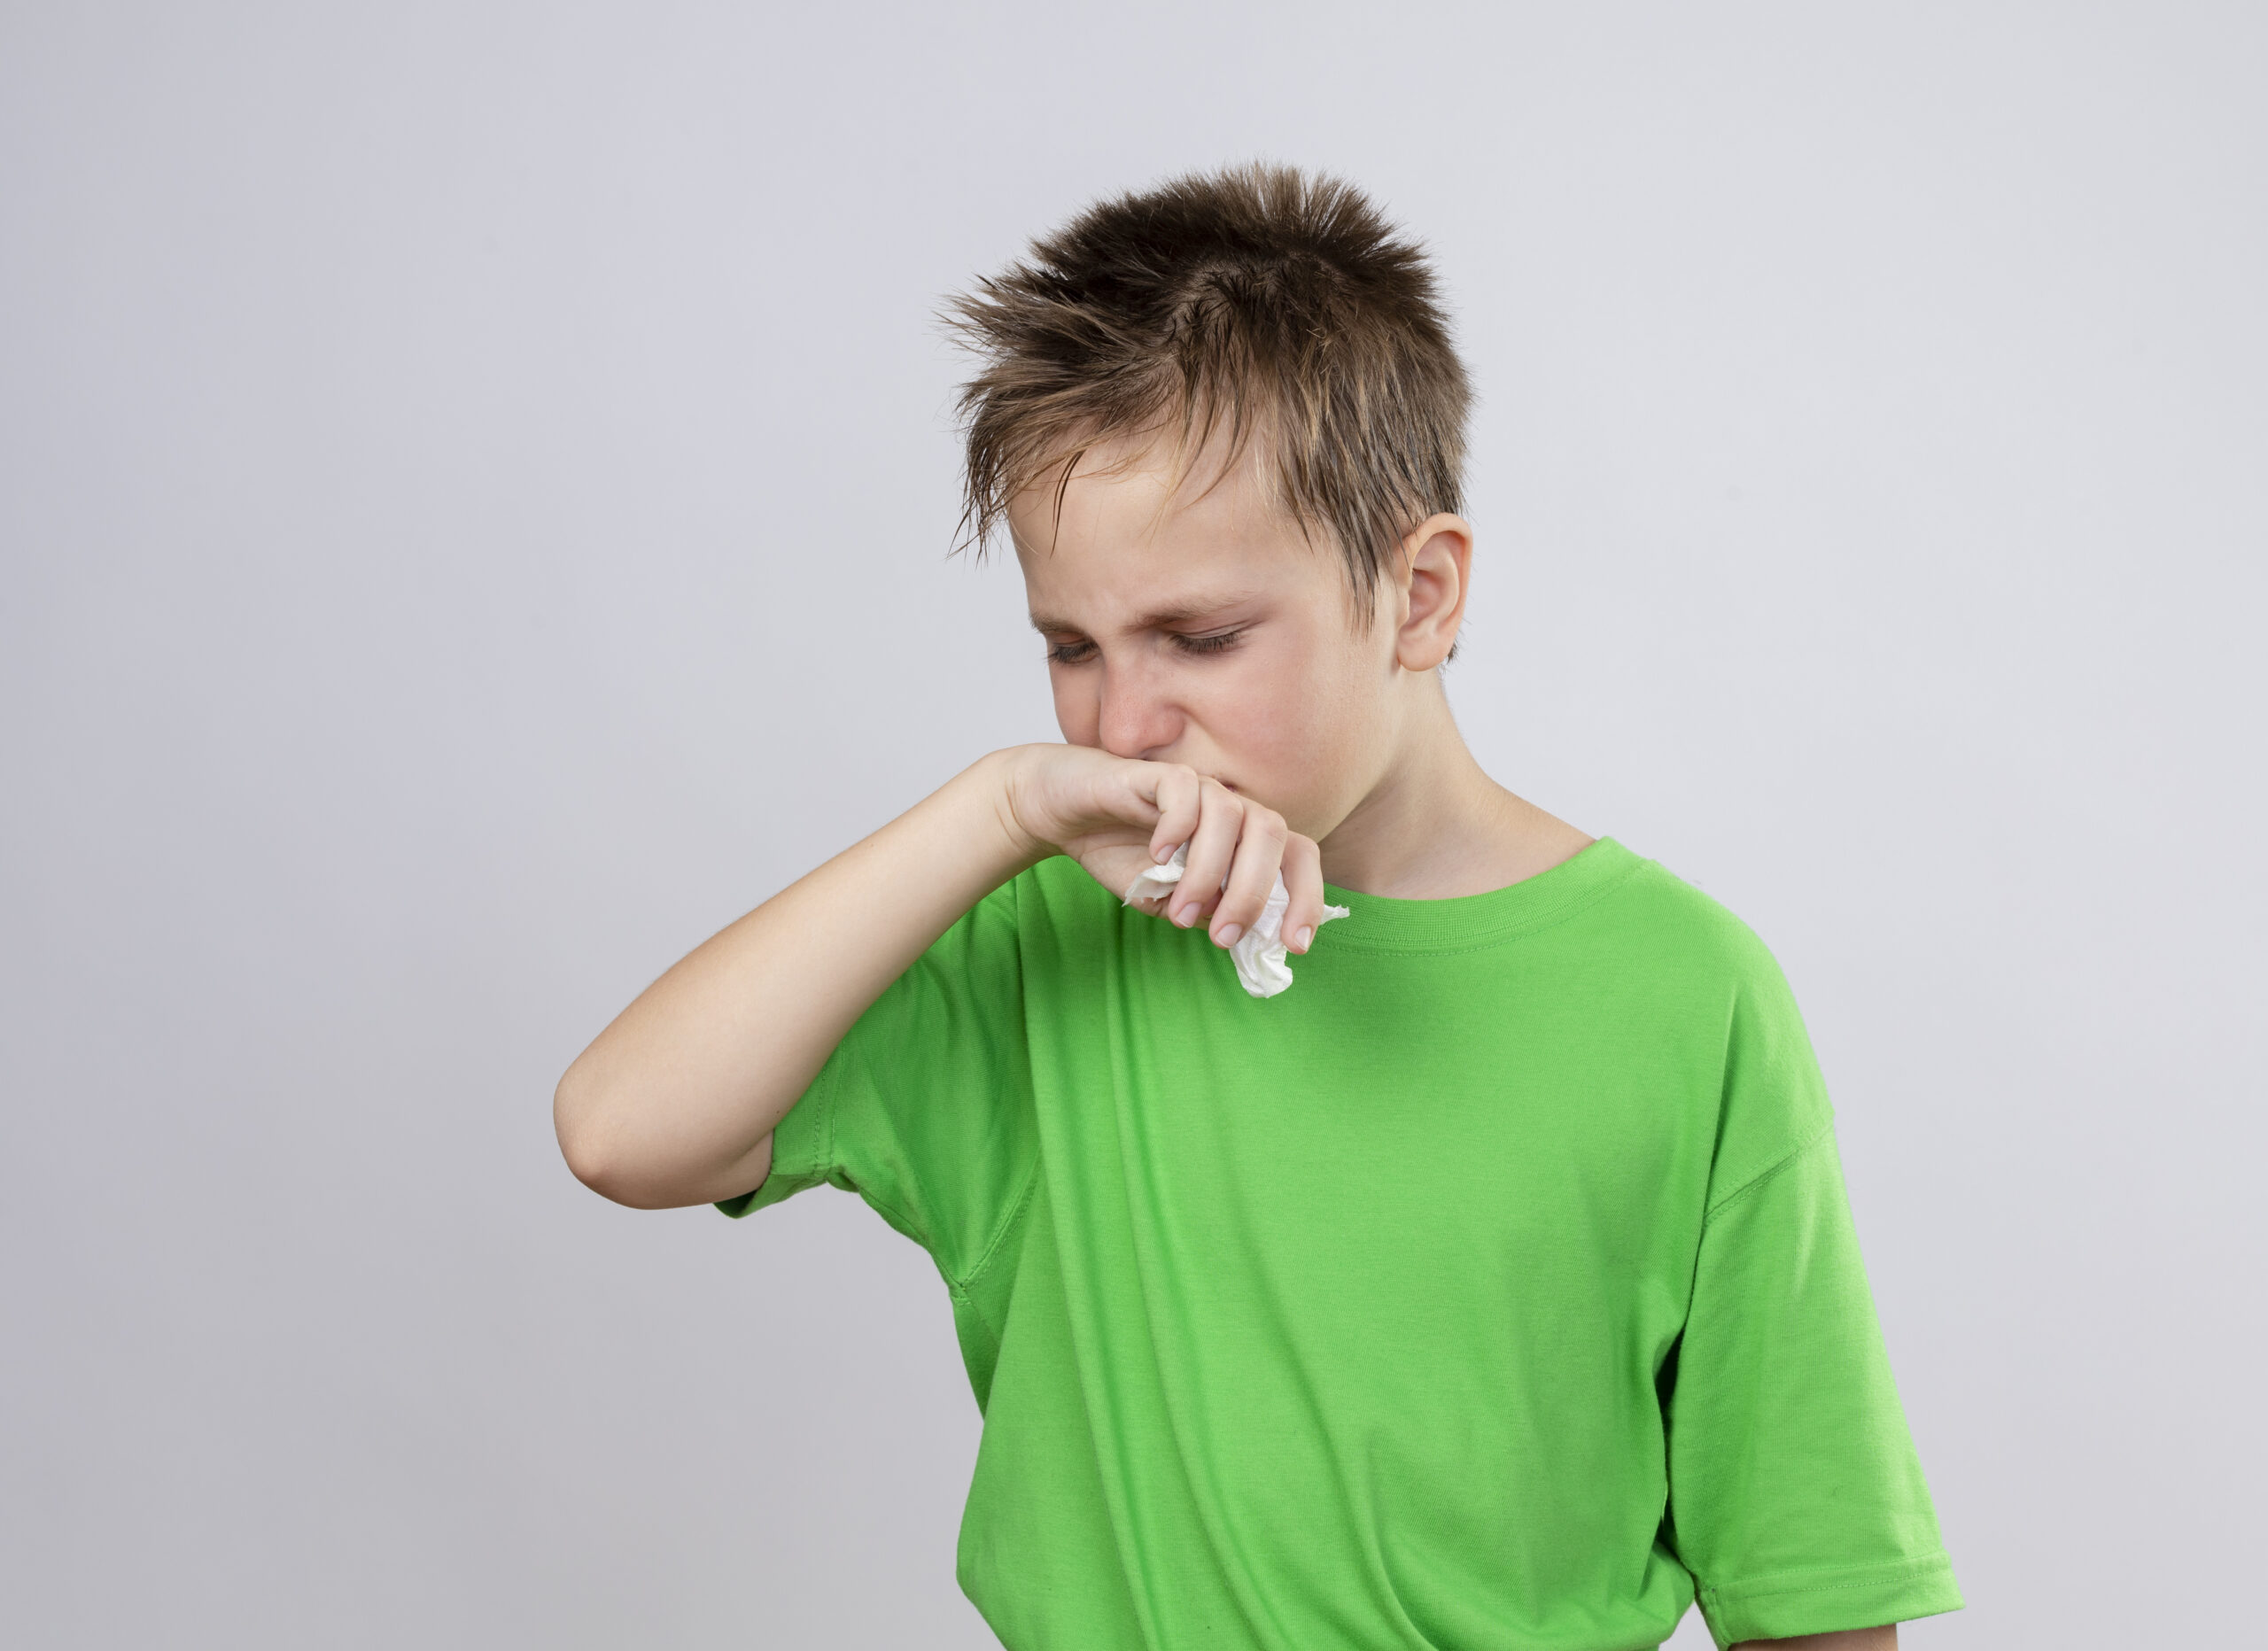 11–14% of Children Aged 5 years & Older Currently Report Asthma Symptoms